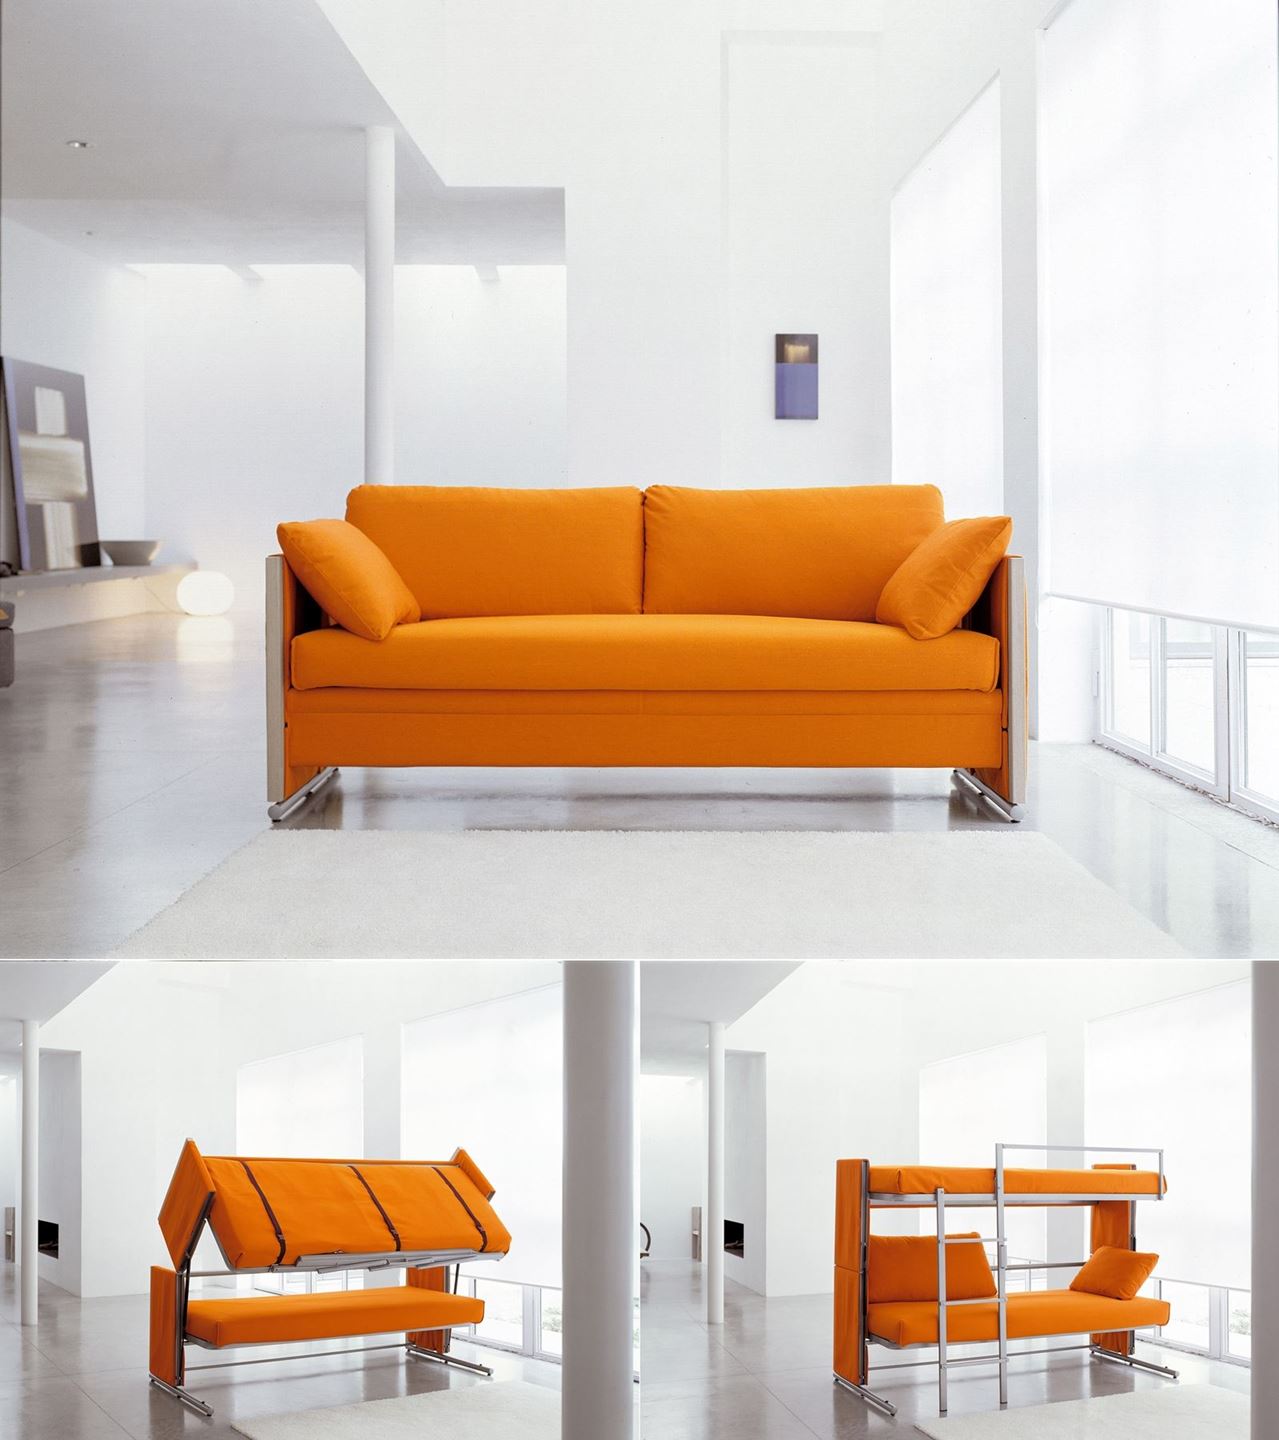 Magical Sofa transforms into a bunk bed in 10 seconds only!